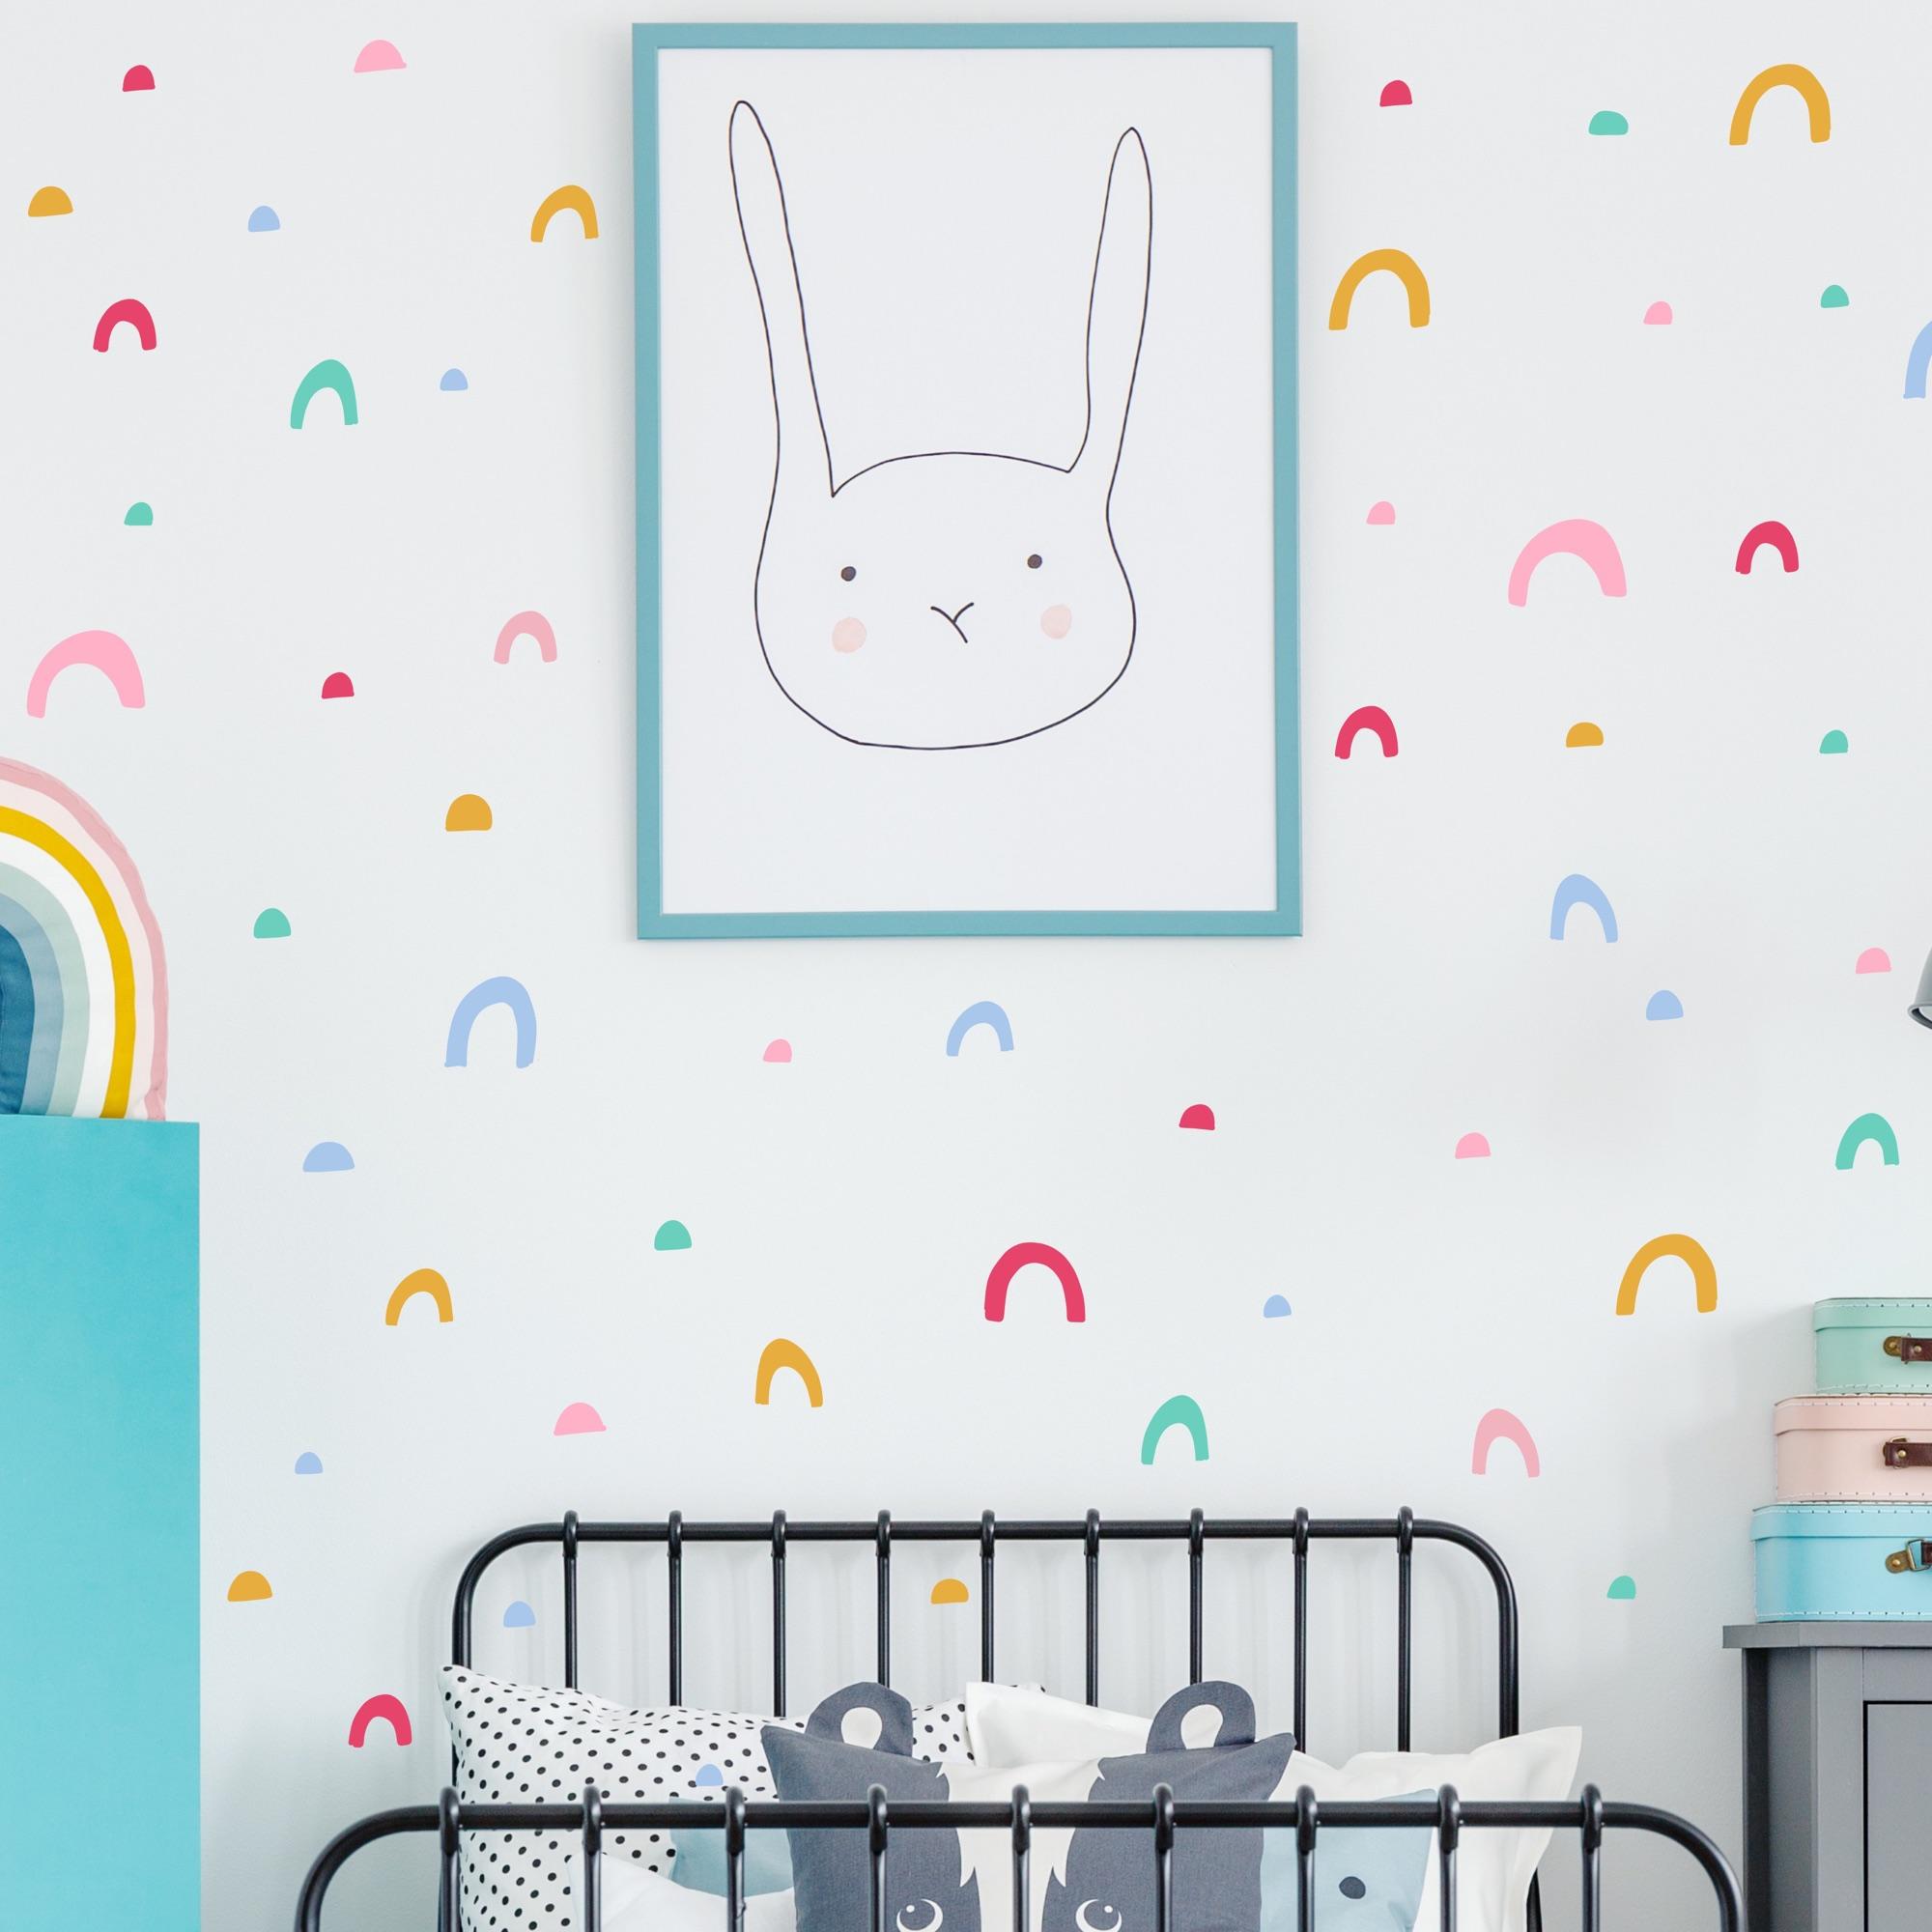 rainbow doodles wall stickers